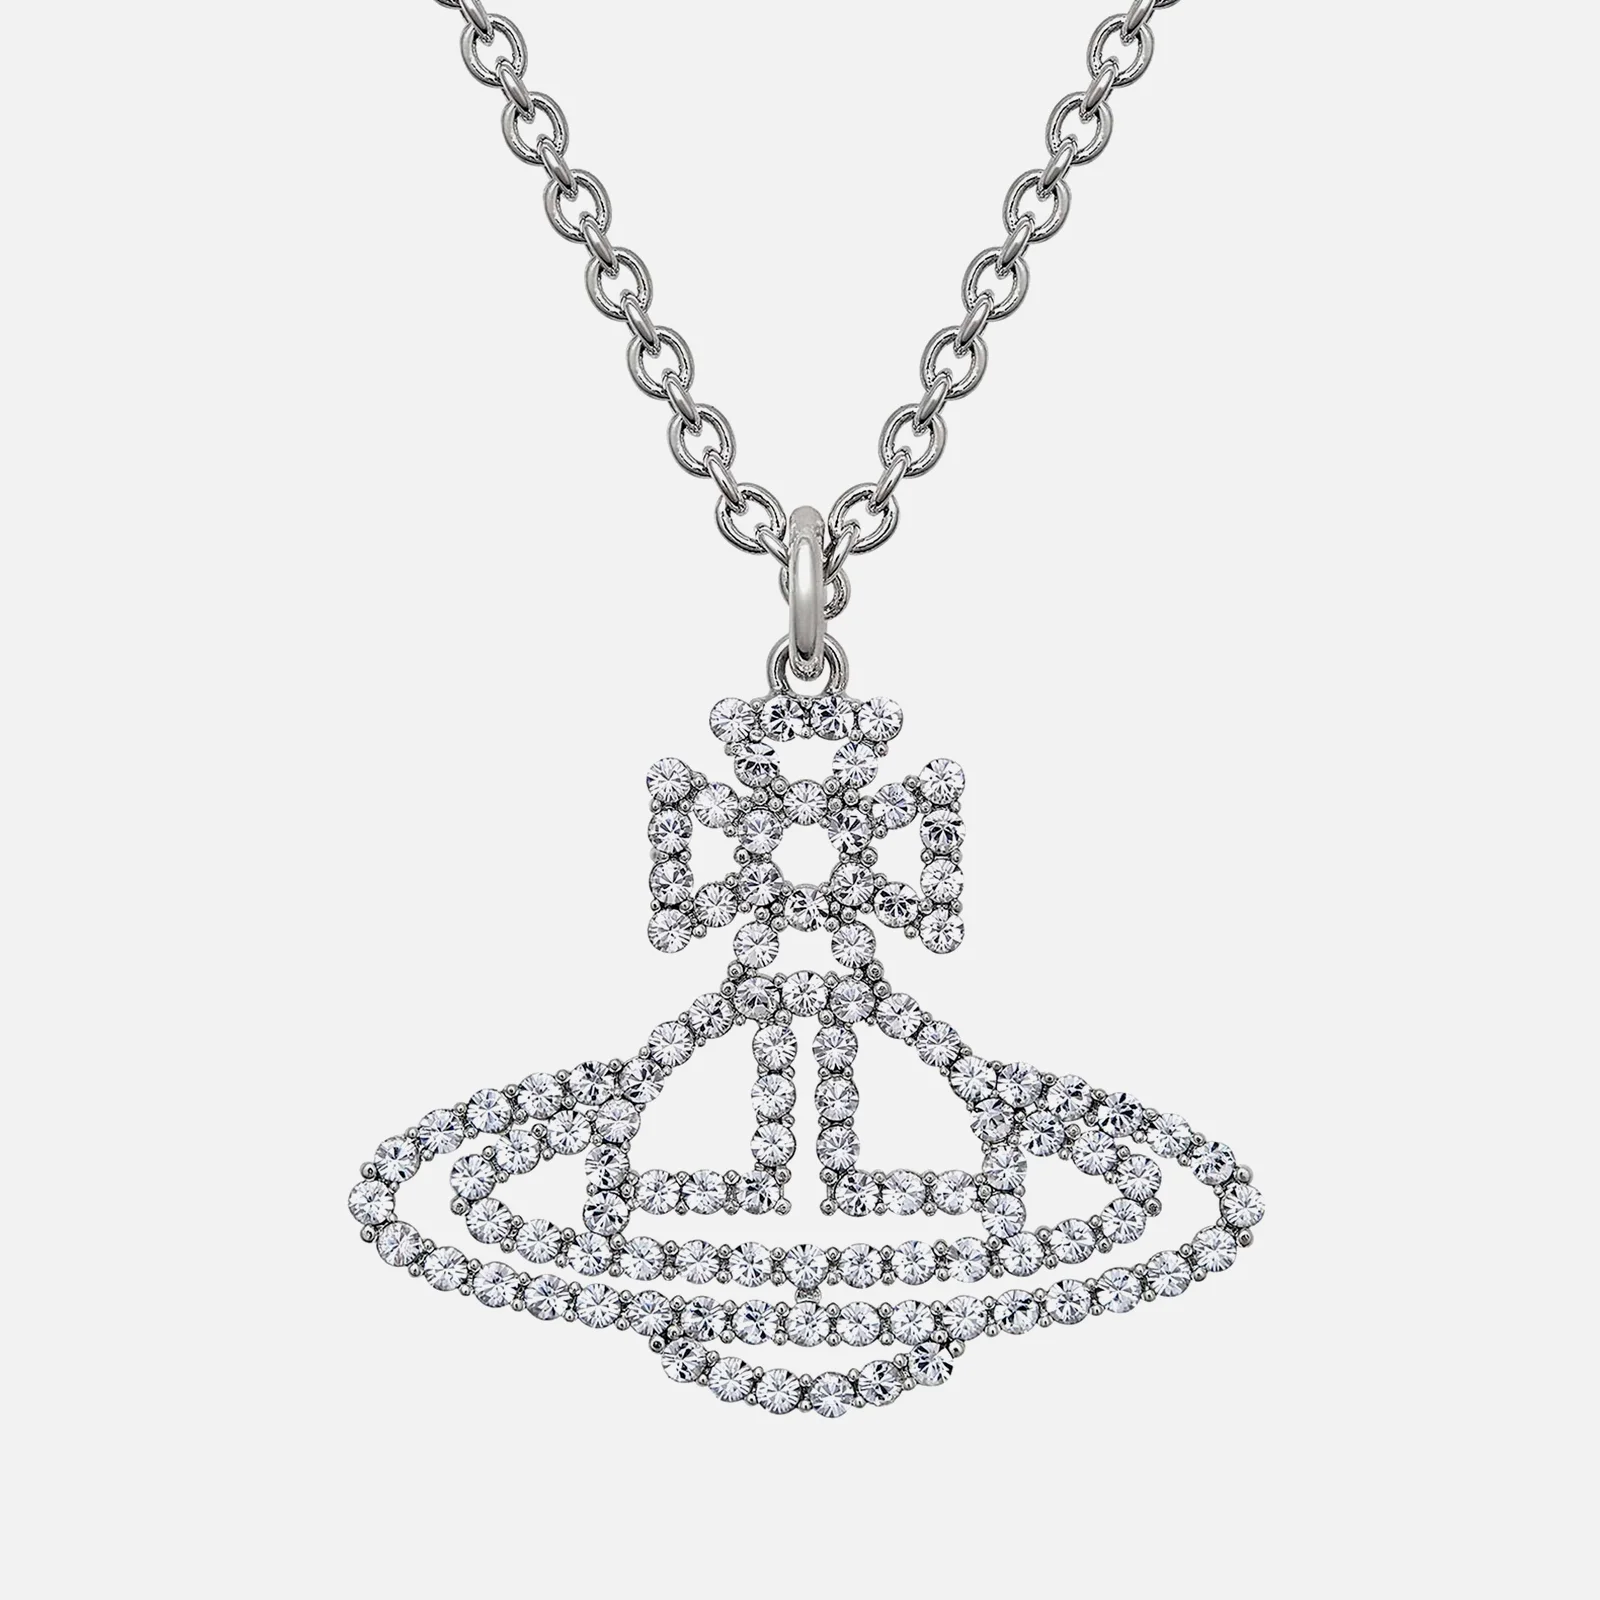 Vivienne Westwood Annalisa Silver-Tone and Crystal Necklace Image 1